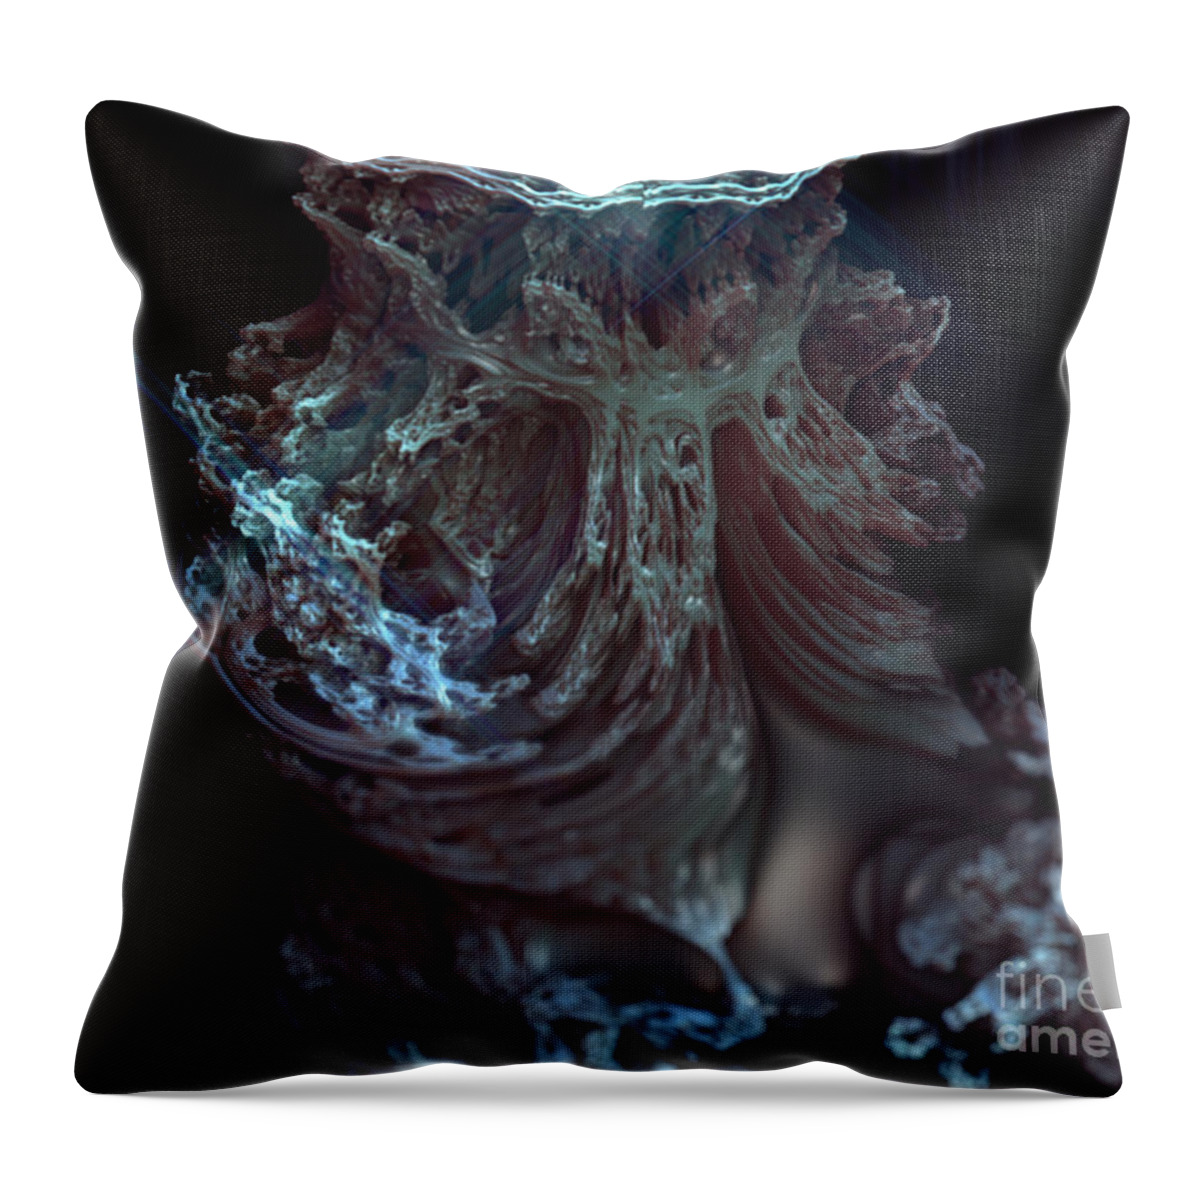 Fractal Throw Pillow featuring the painting Fractal Beauty 1 by Pixel Chimp